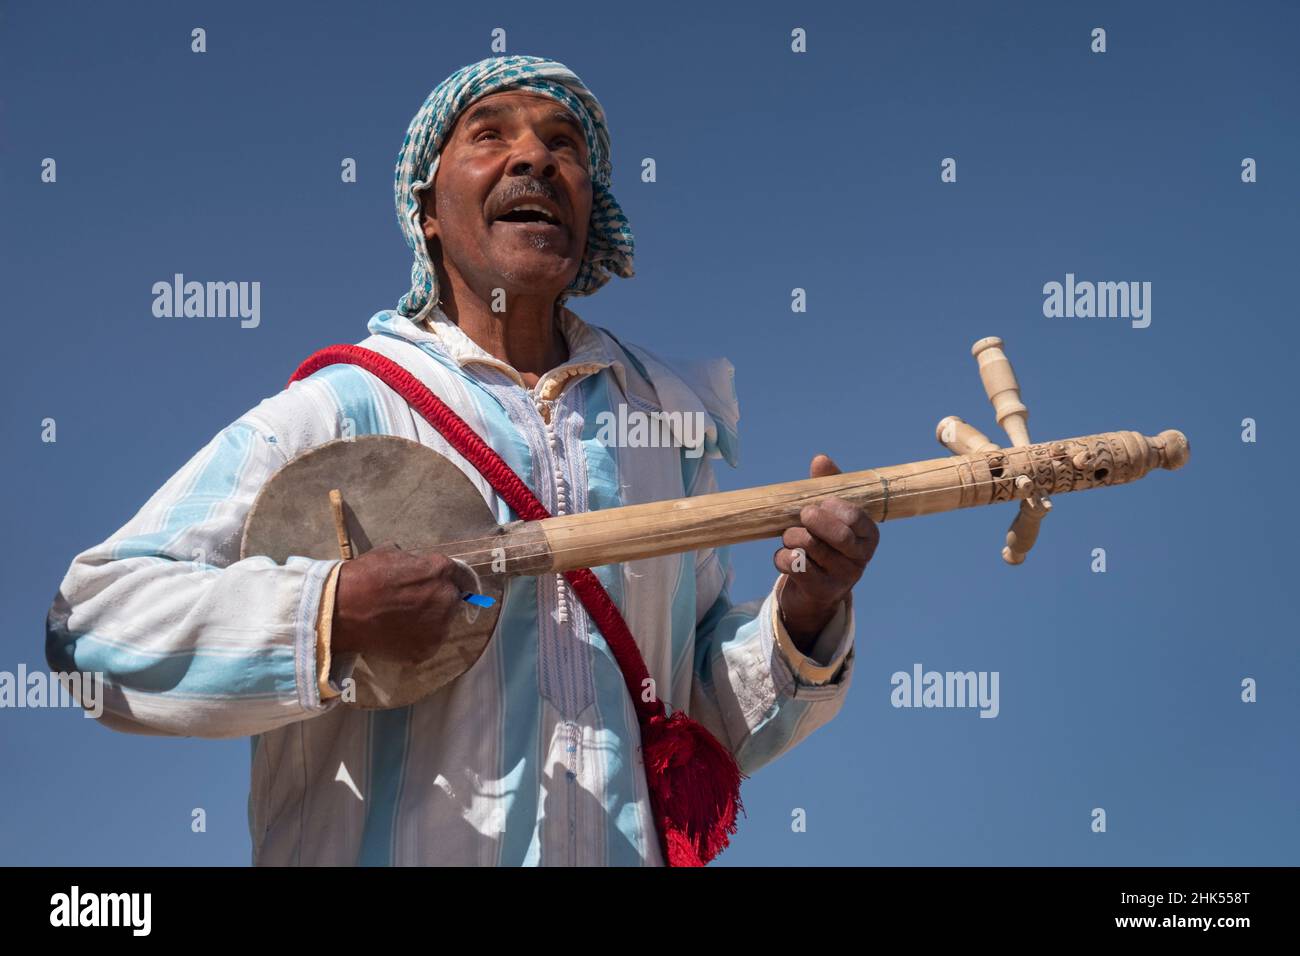 Moroccan man in traditional dress playing a traditional Gimbri instrument, Ouarzazate, Atlas Mountains, Morocco, North Africa, Africa Stock Photo